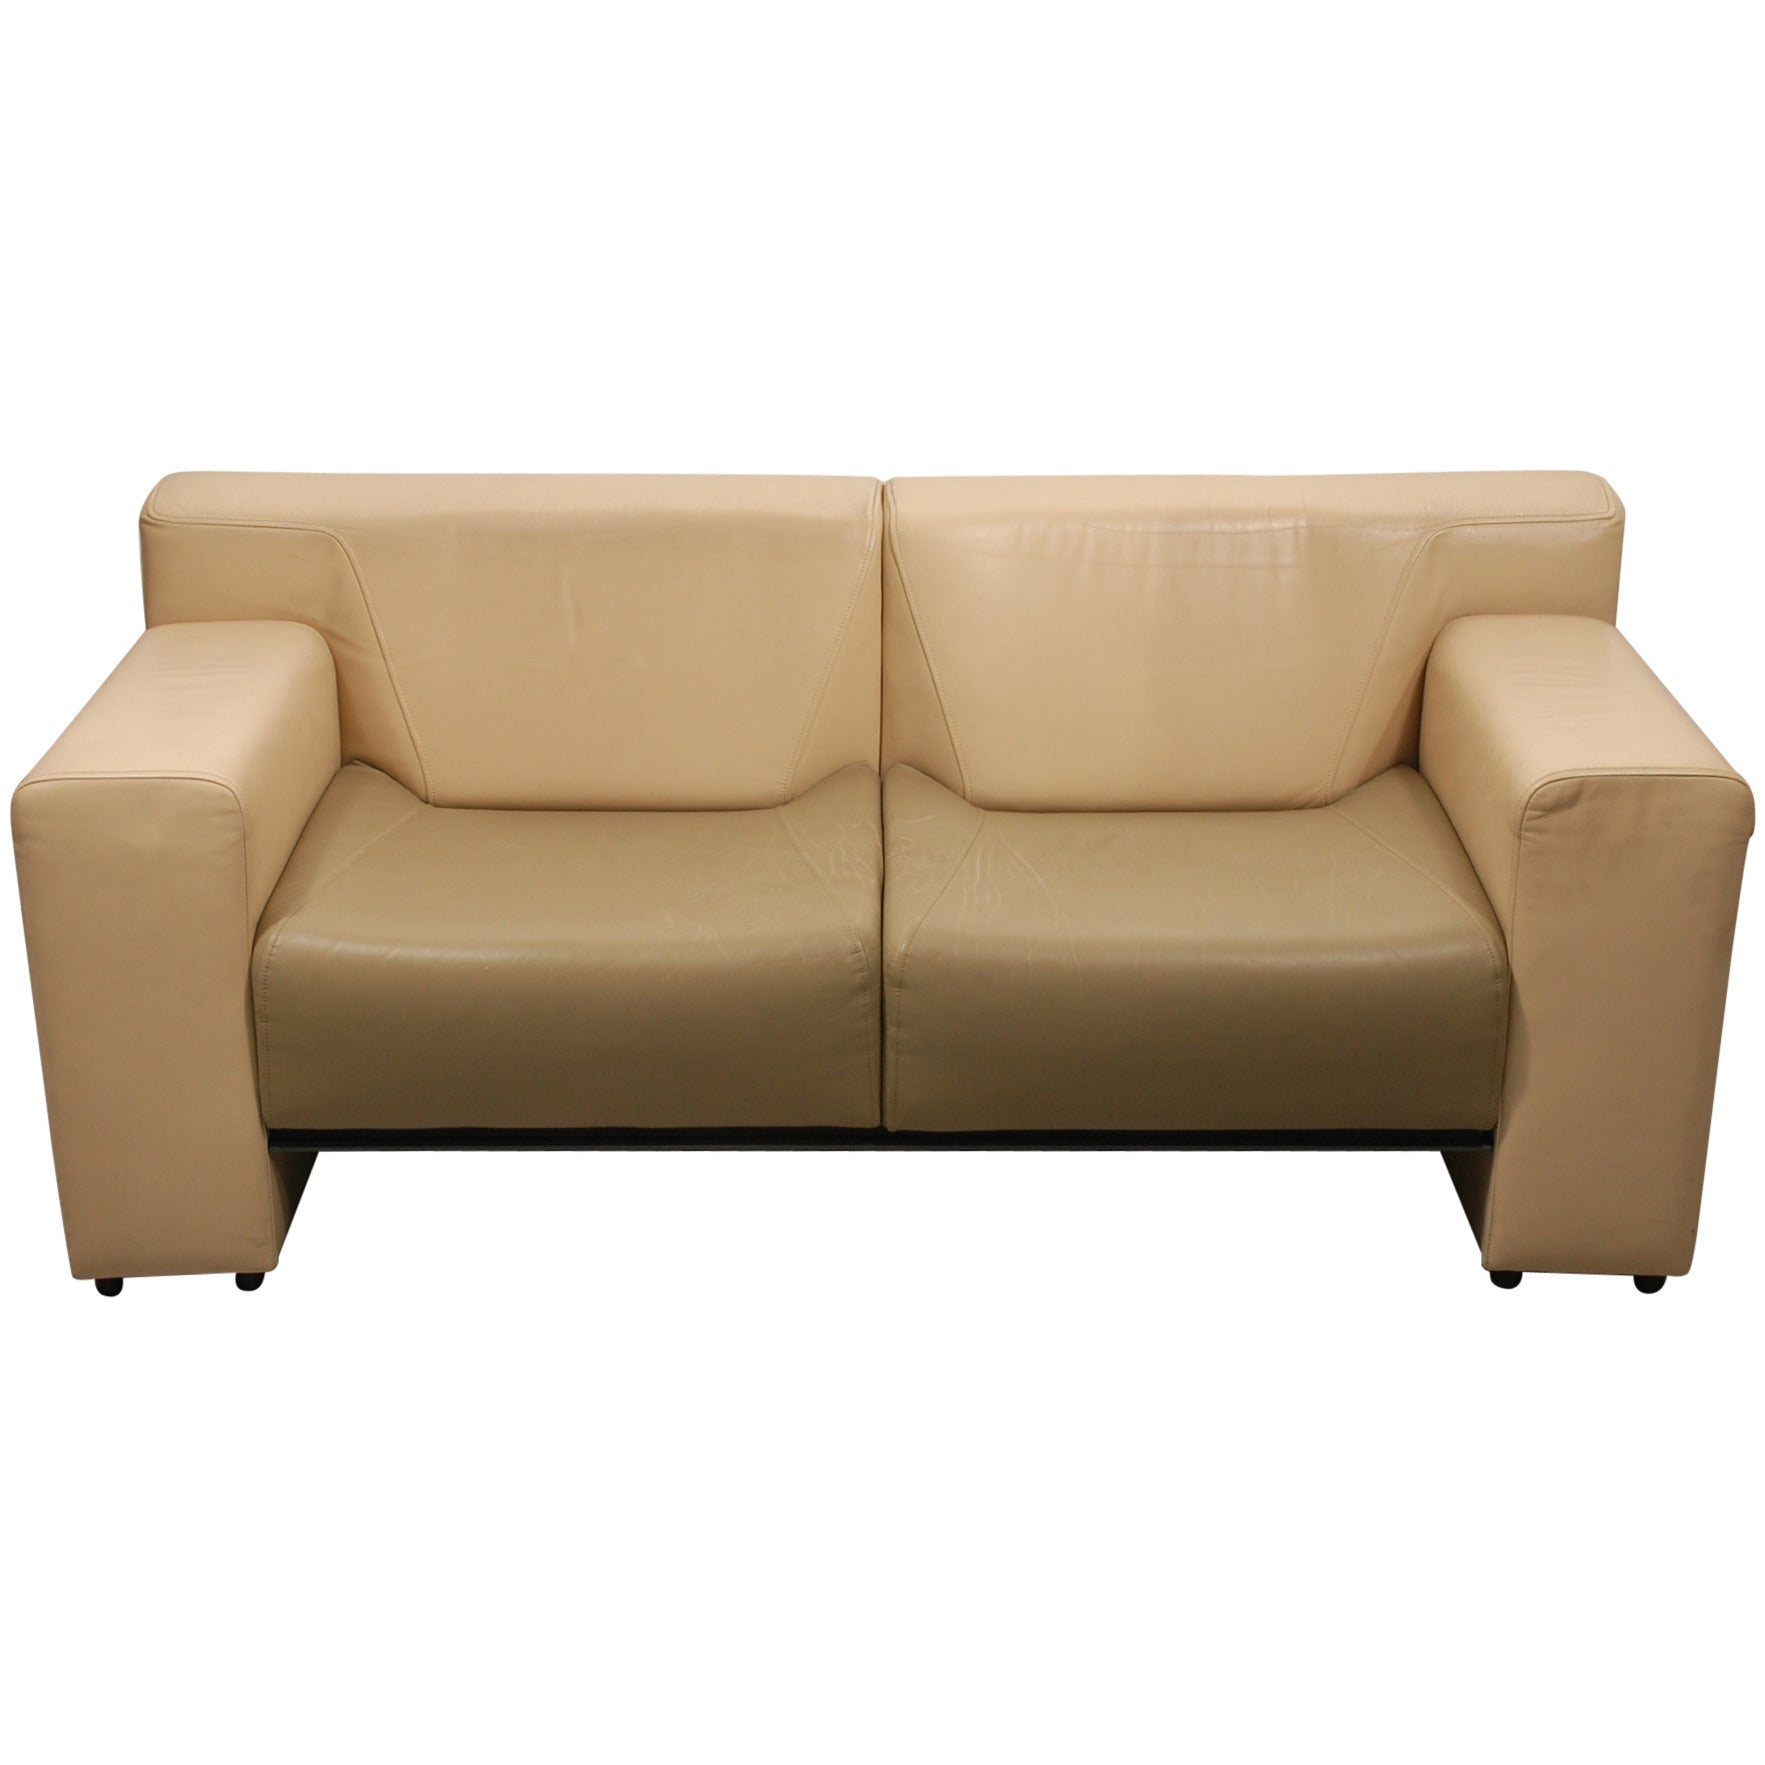 Artifort Seating Combination For Sale